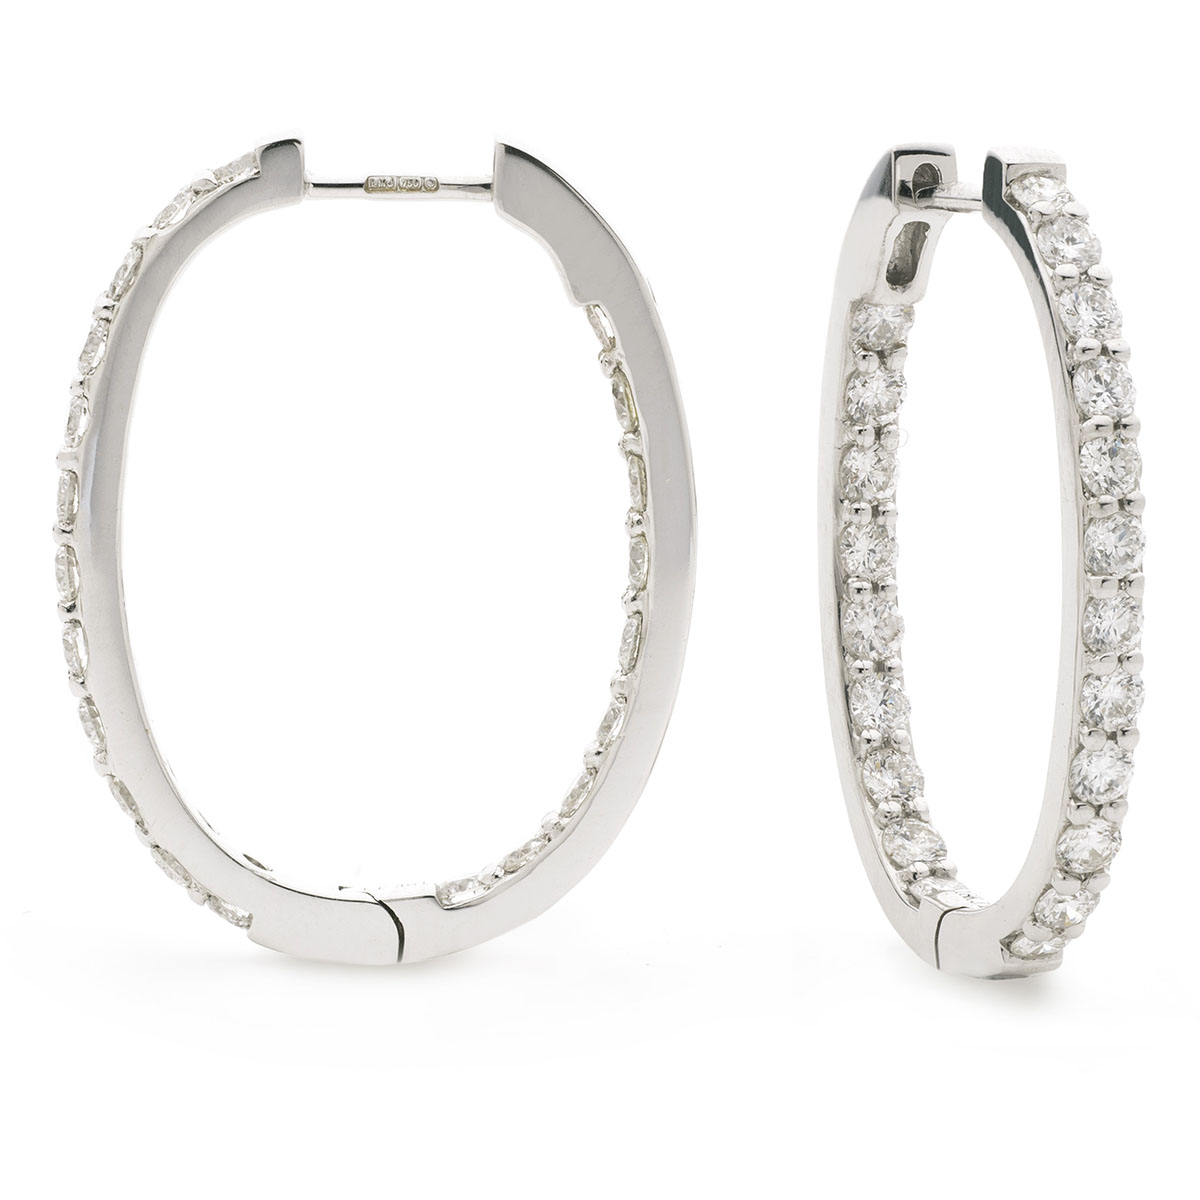 Claw Set In And Out Diamond Hoops Earrings